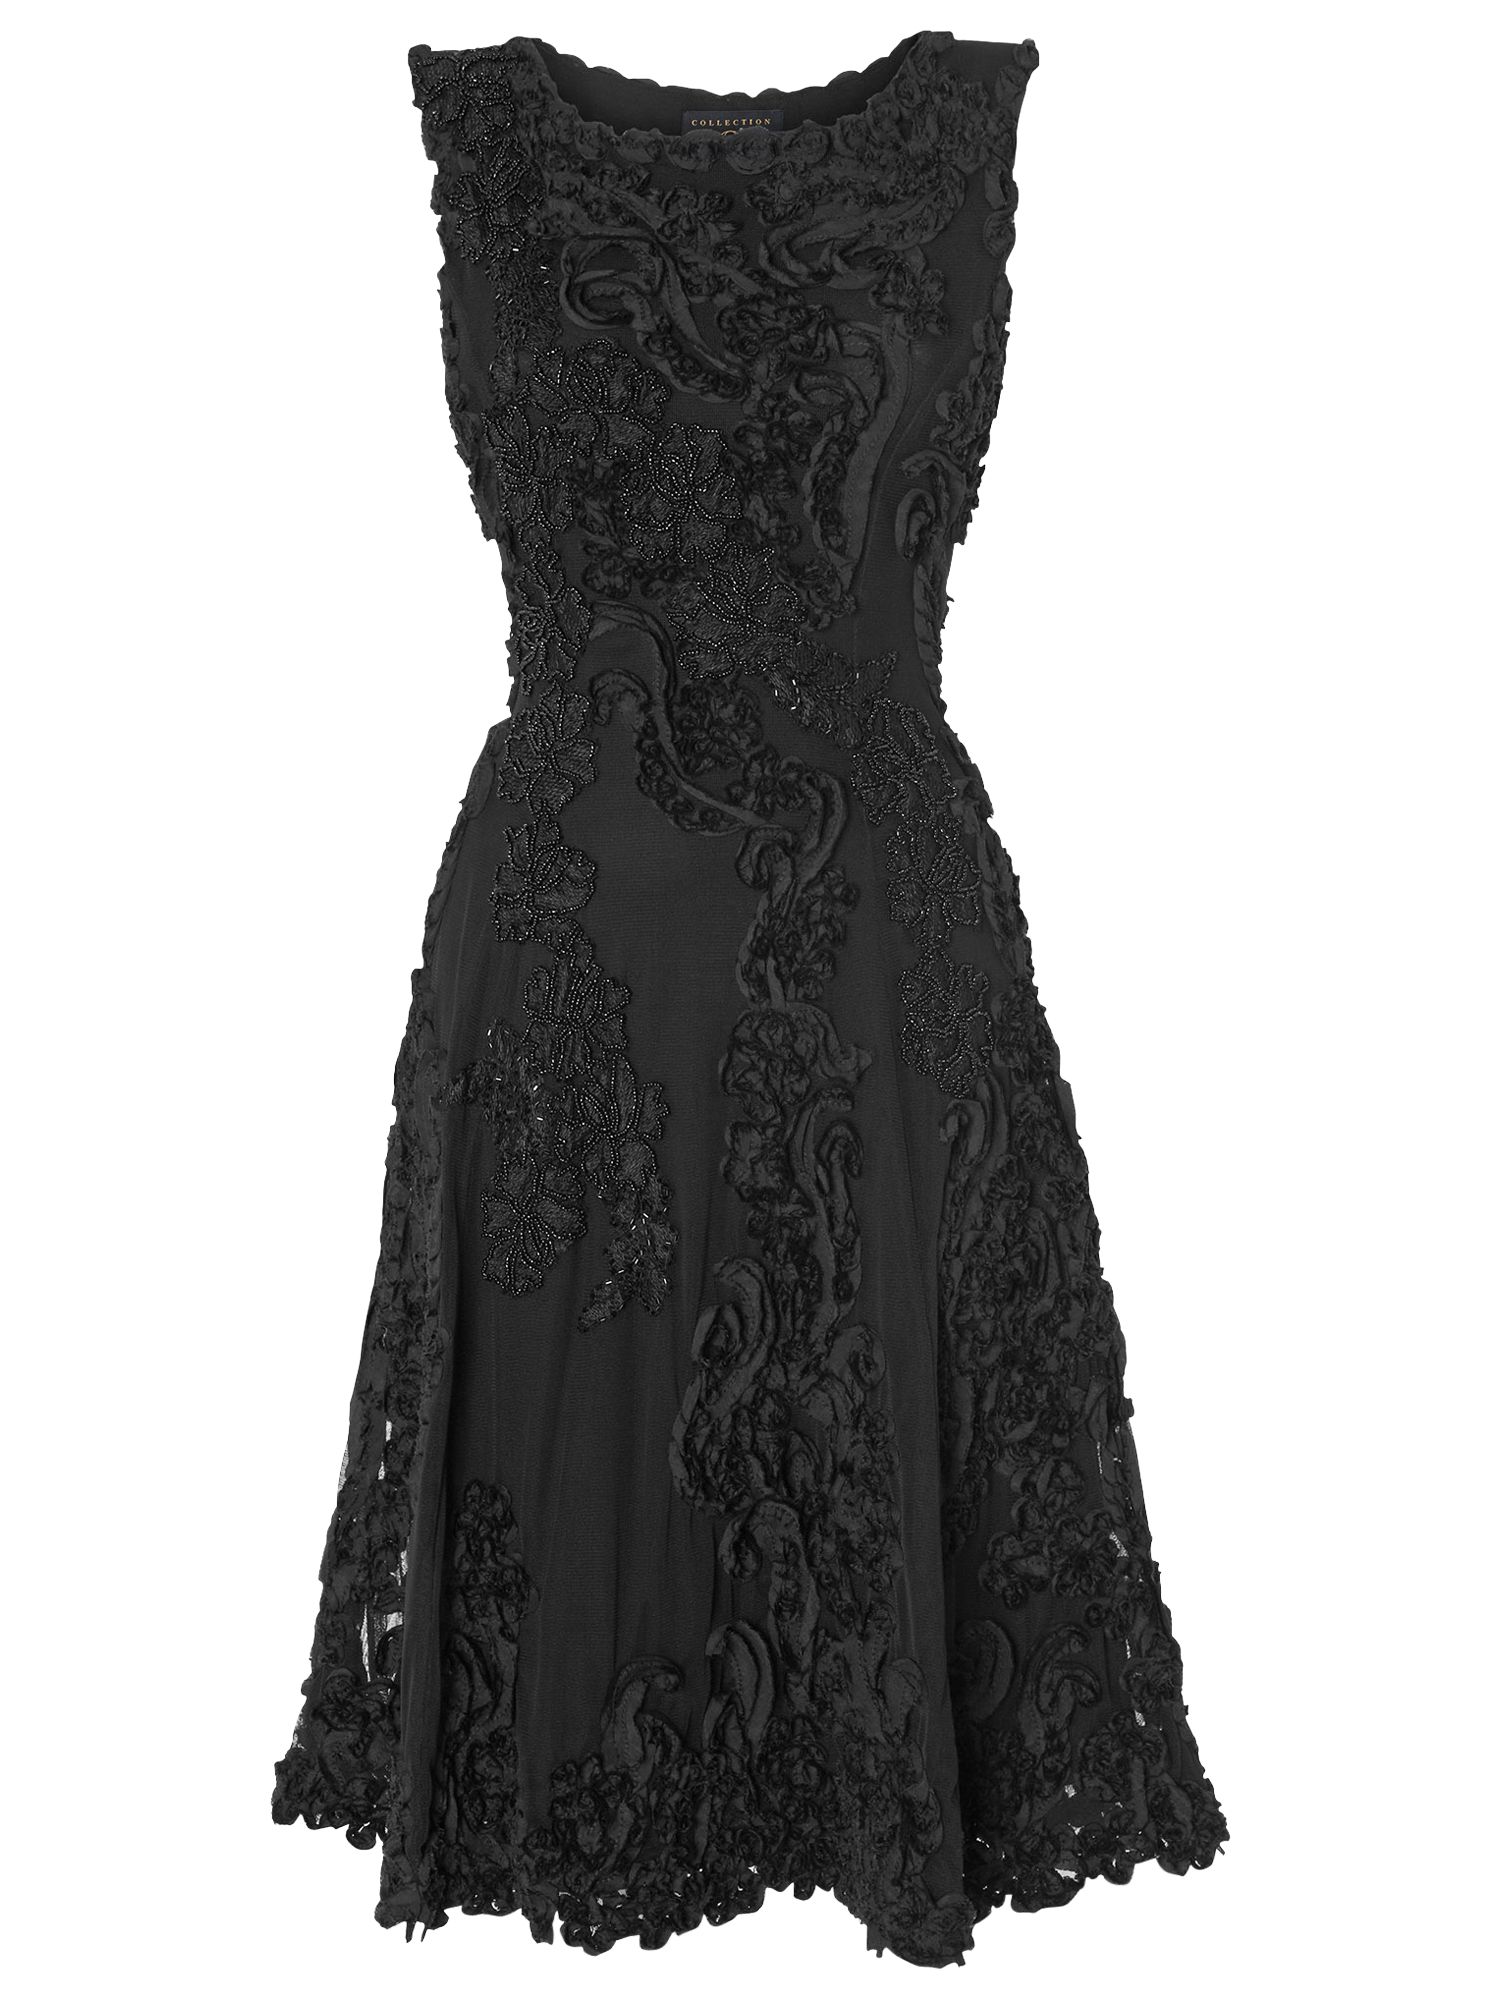 Phase Eight Collection 8 Callula Fit and Flare Dress, Black